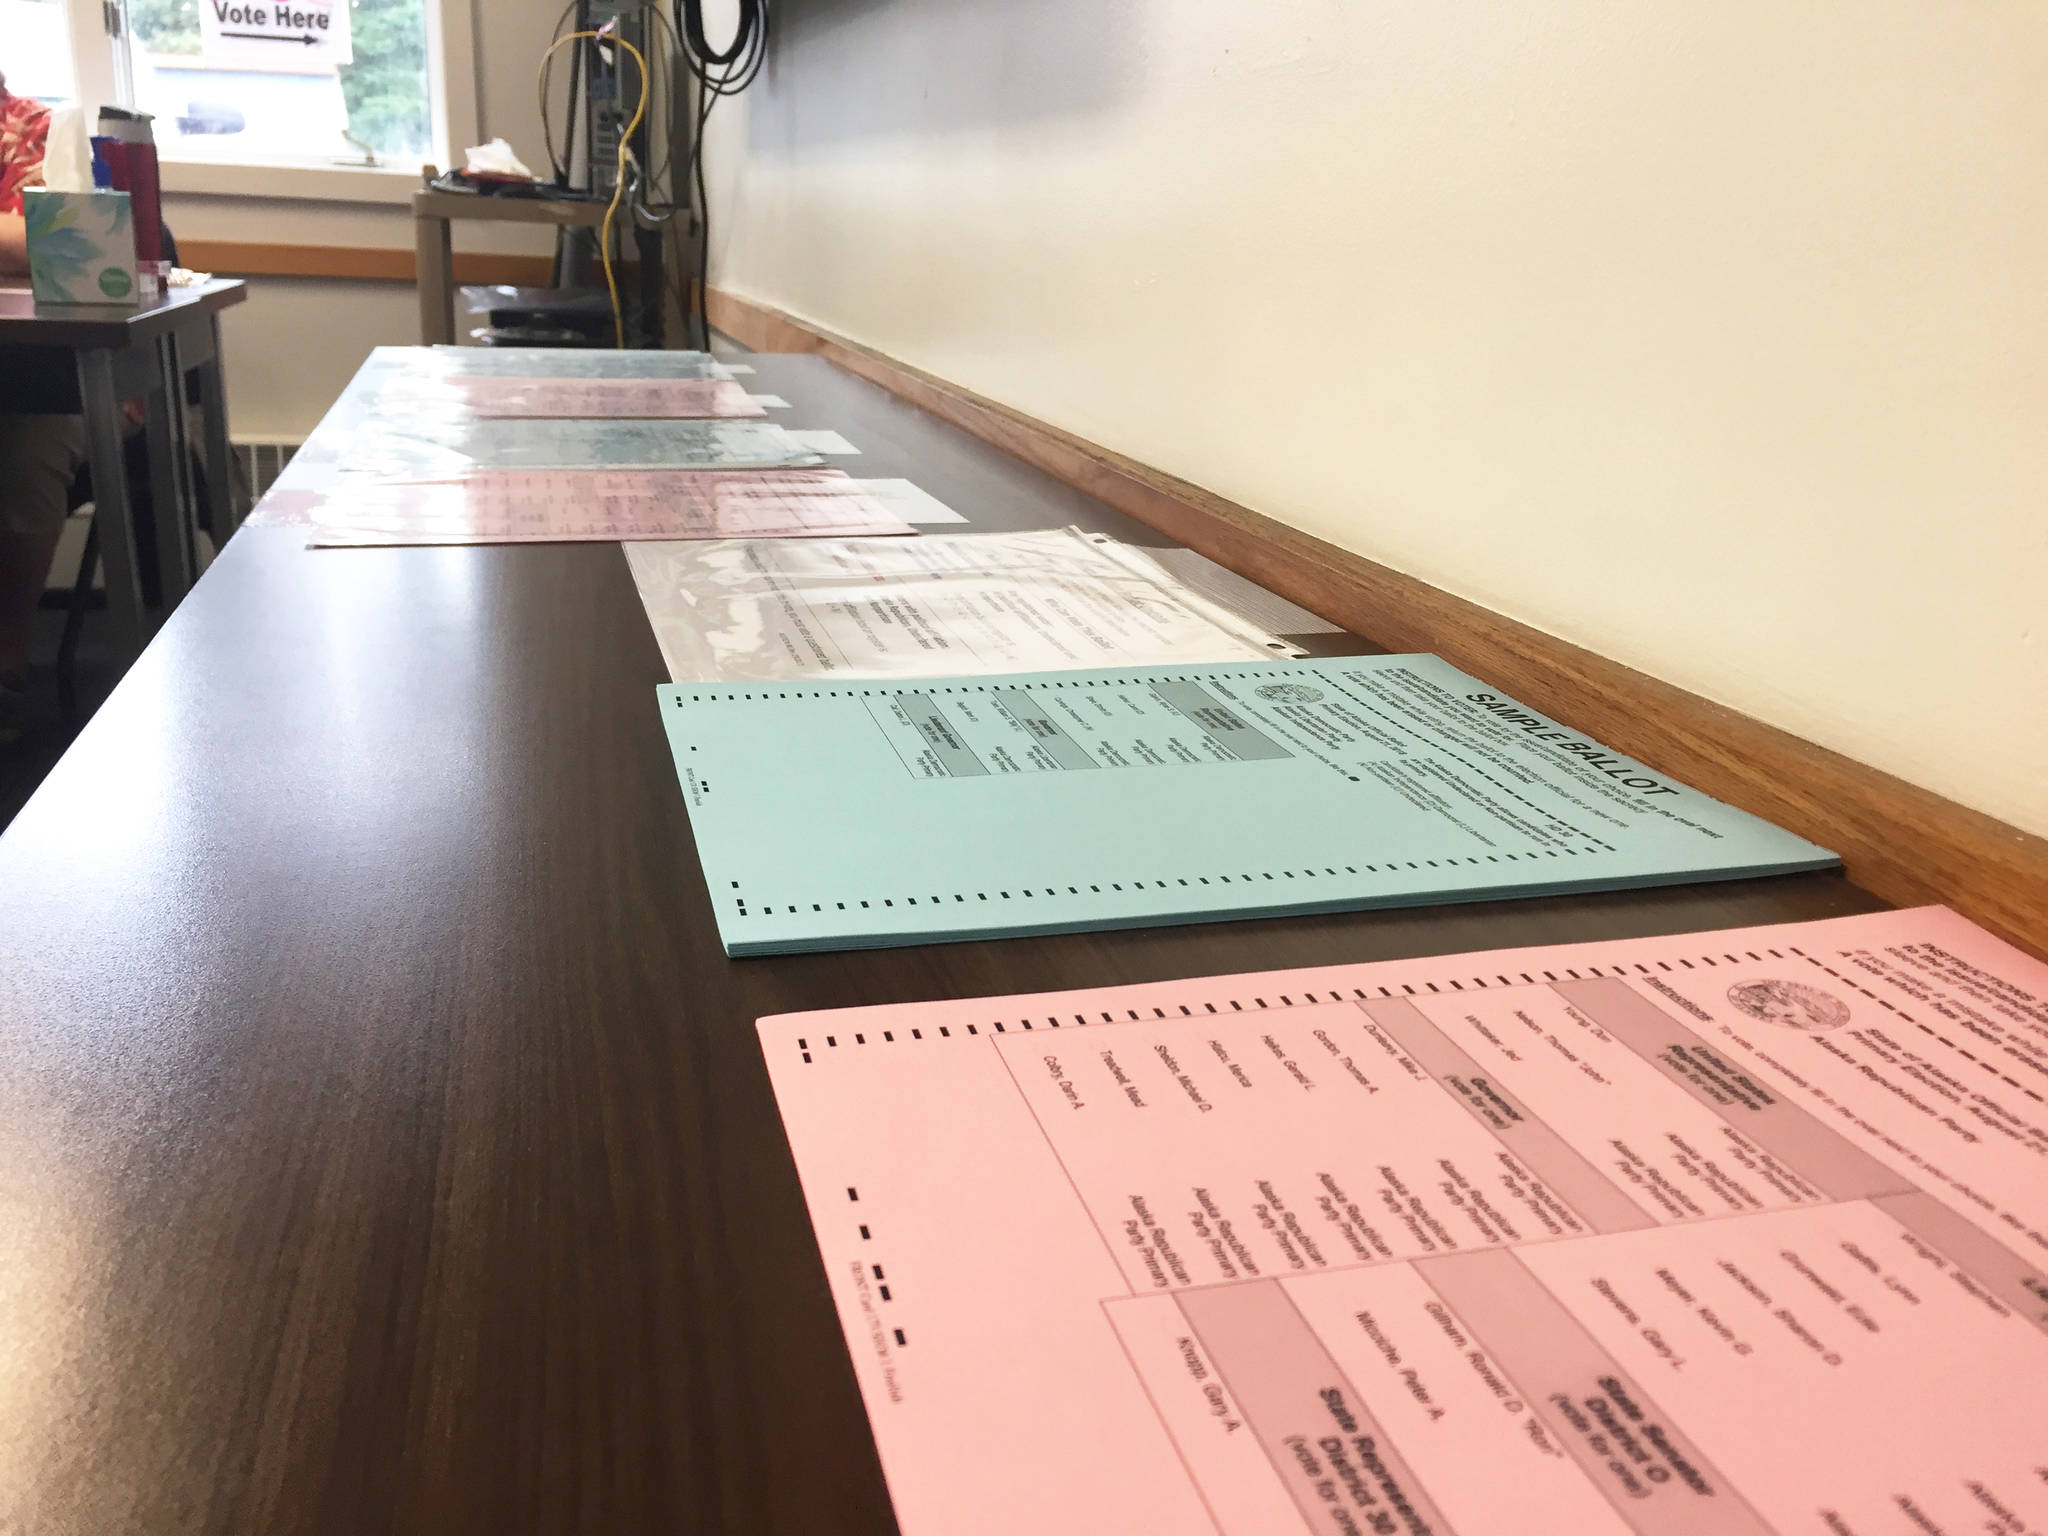 Sample ballots sit on a tabletop at the the Kalifornsky Beach Road Central Emergency Services fire station on Tuesday, Aug. 21, 2018 near Kenai, Alaska. (Photo by Elizabeth Earl/Peninsula Clarion)